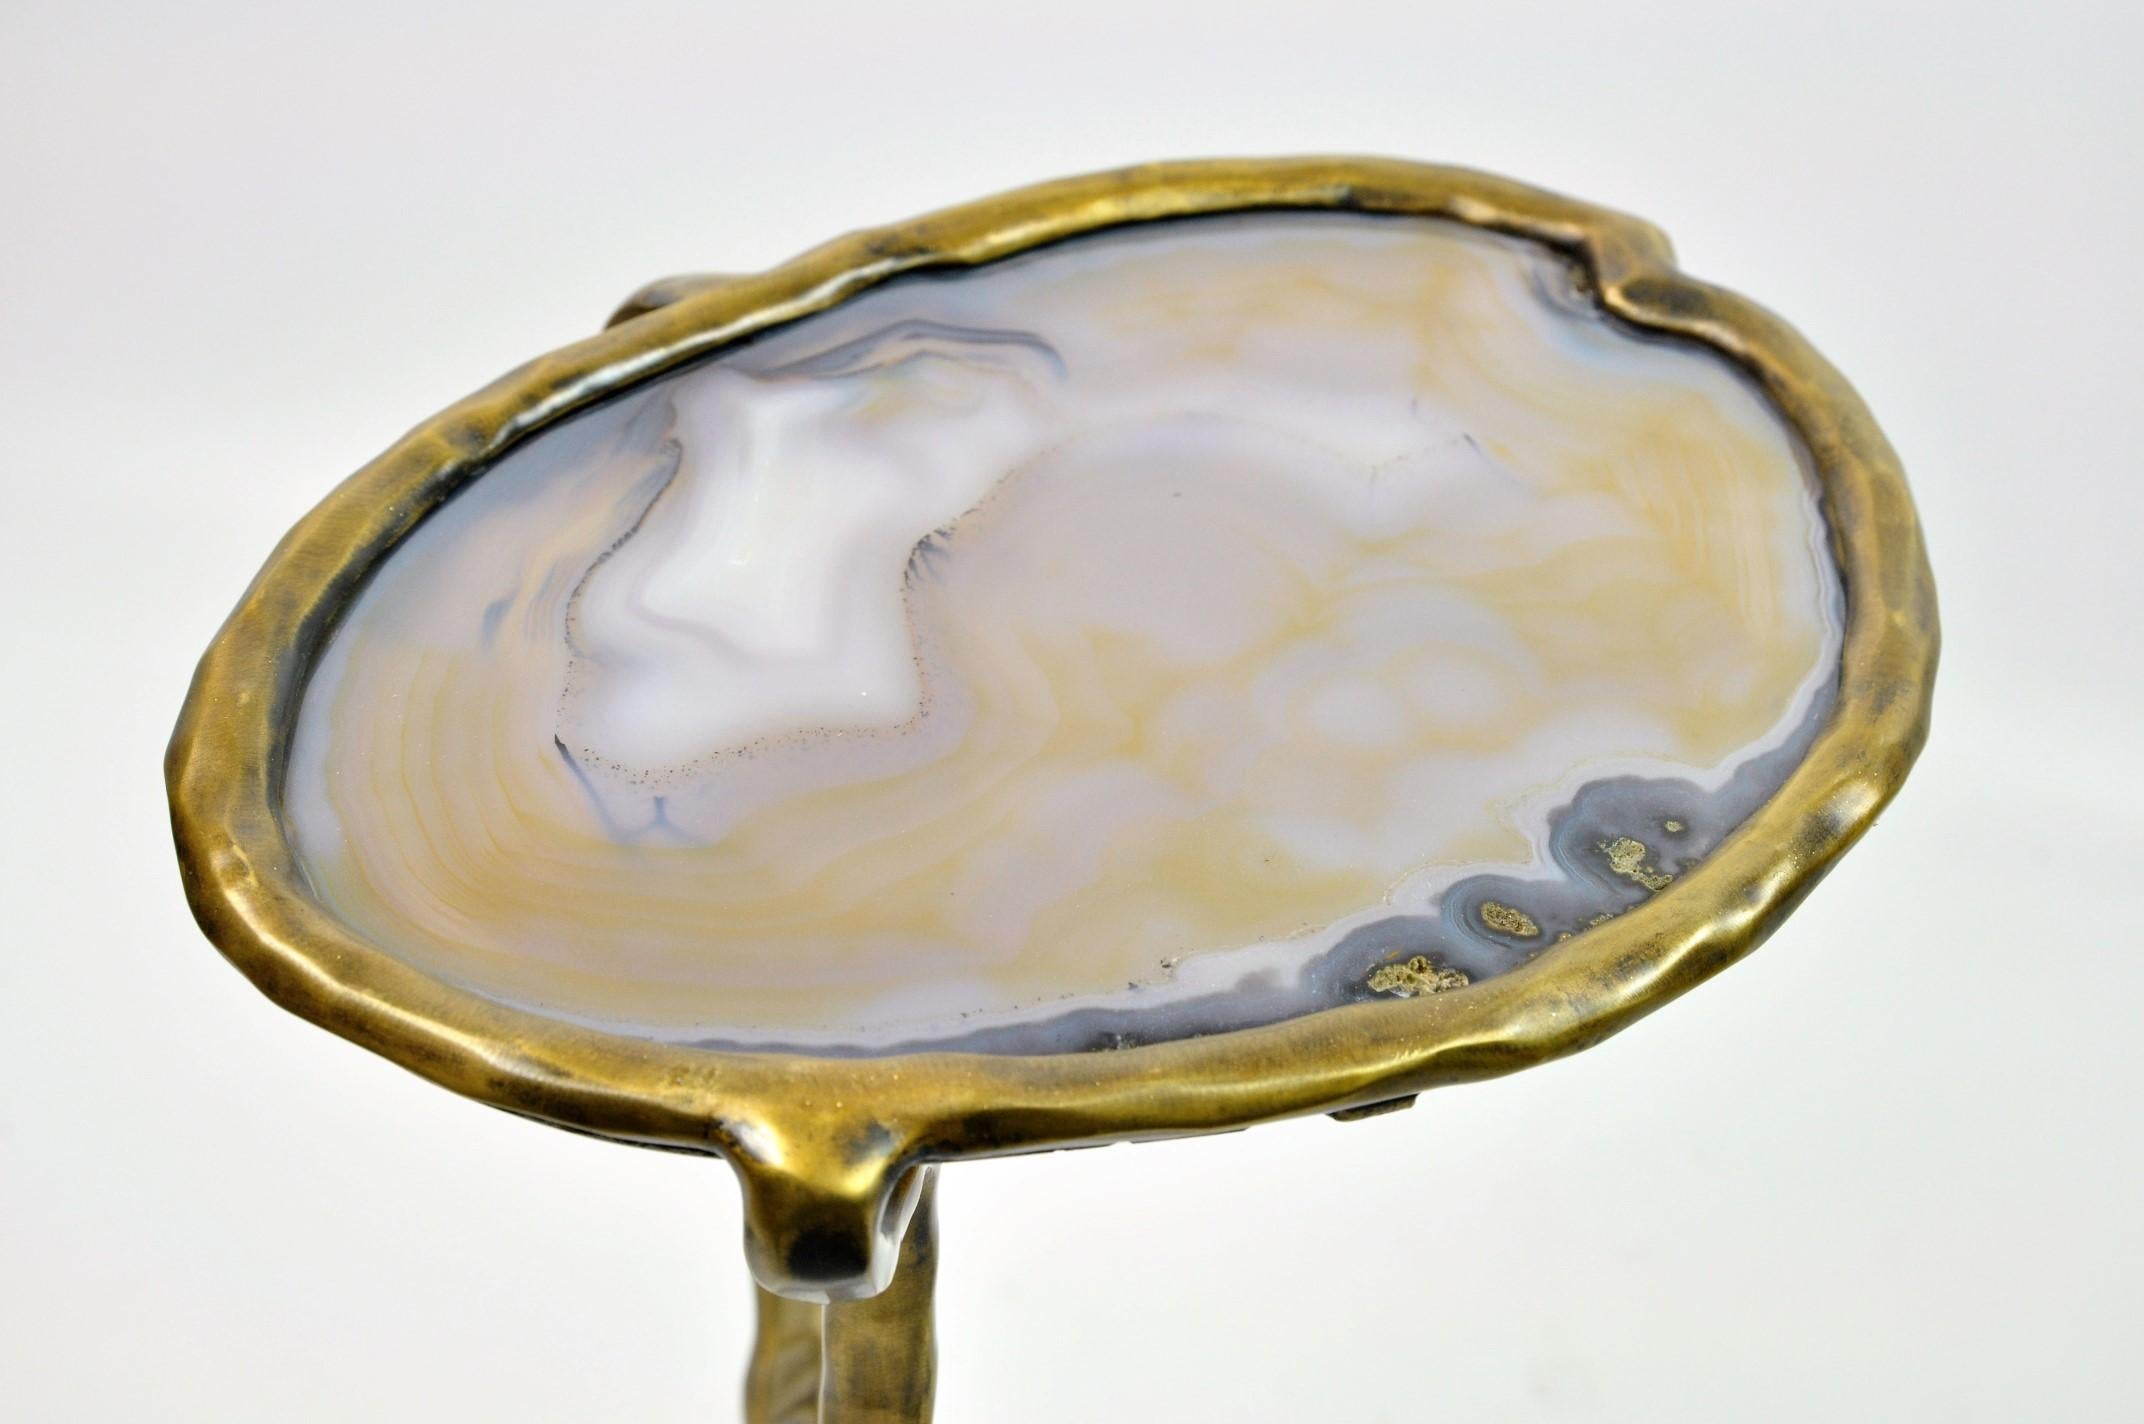 The Serpent side table is a unique piece made of lost wax cast brass patinated in bronze with a beautiful large agate slice top.
The brass has been casted around the agate slice to fit perfectly its natural shape.
The natural agate gives a real